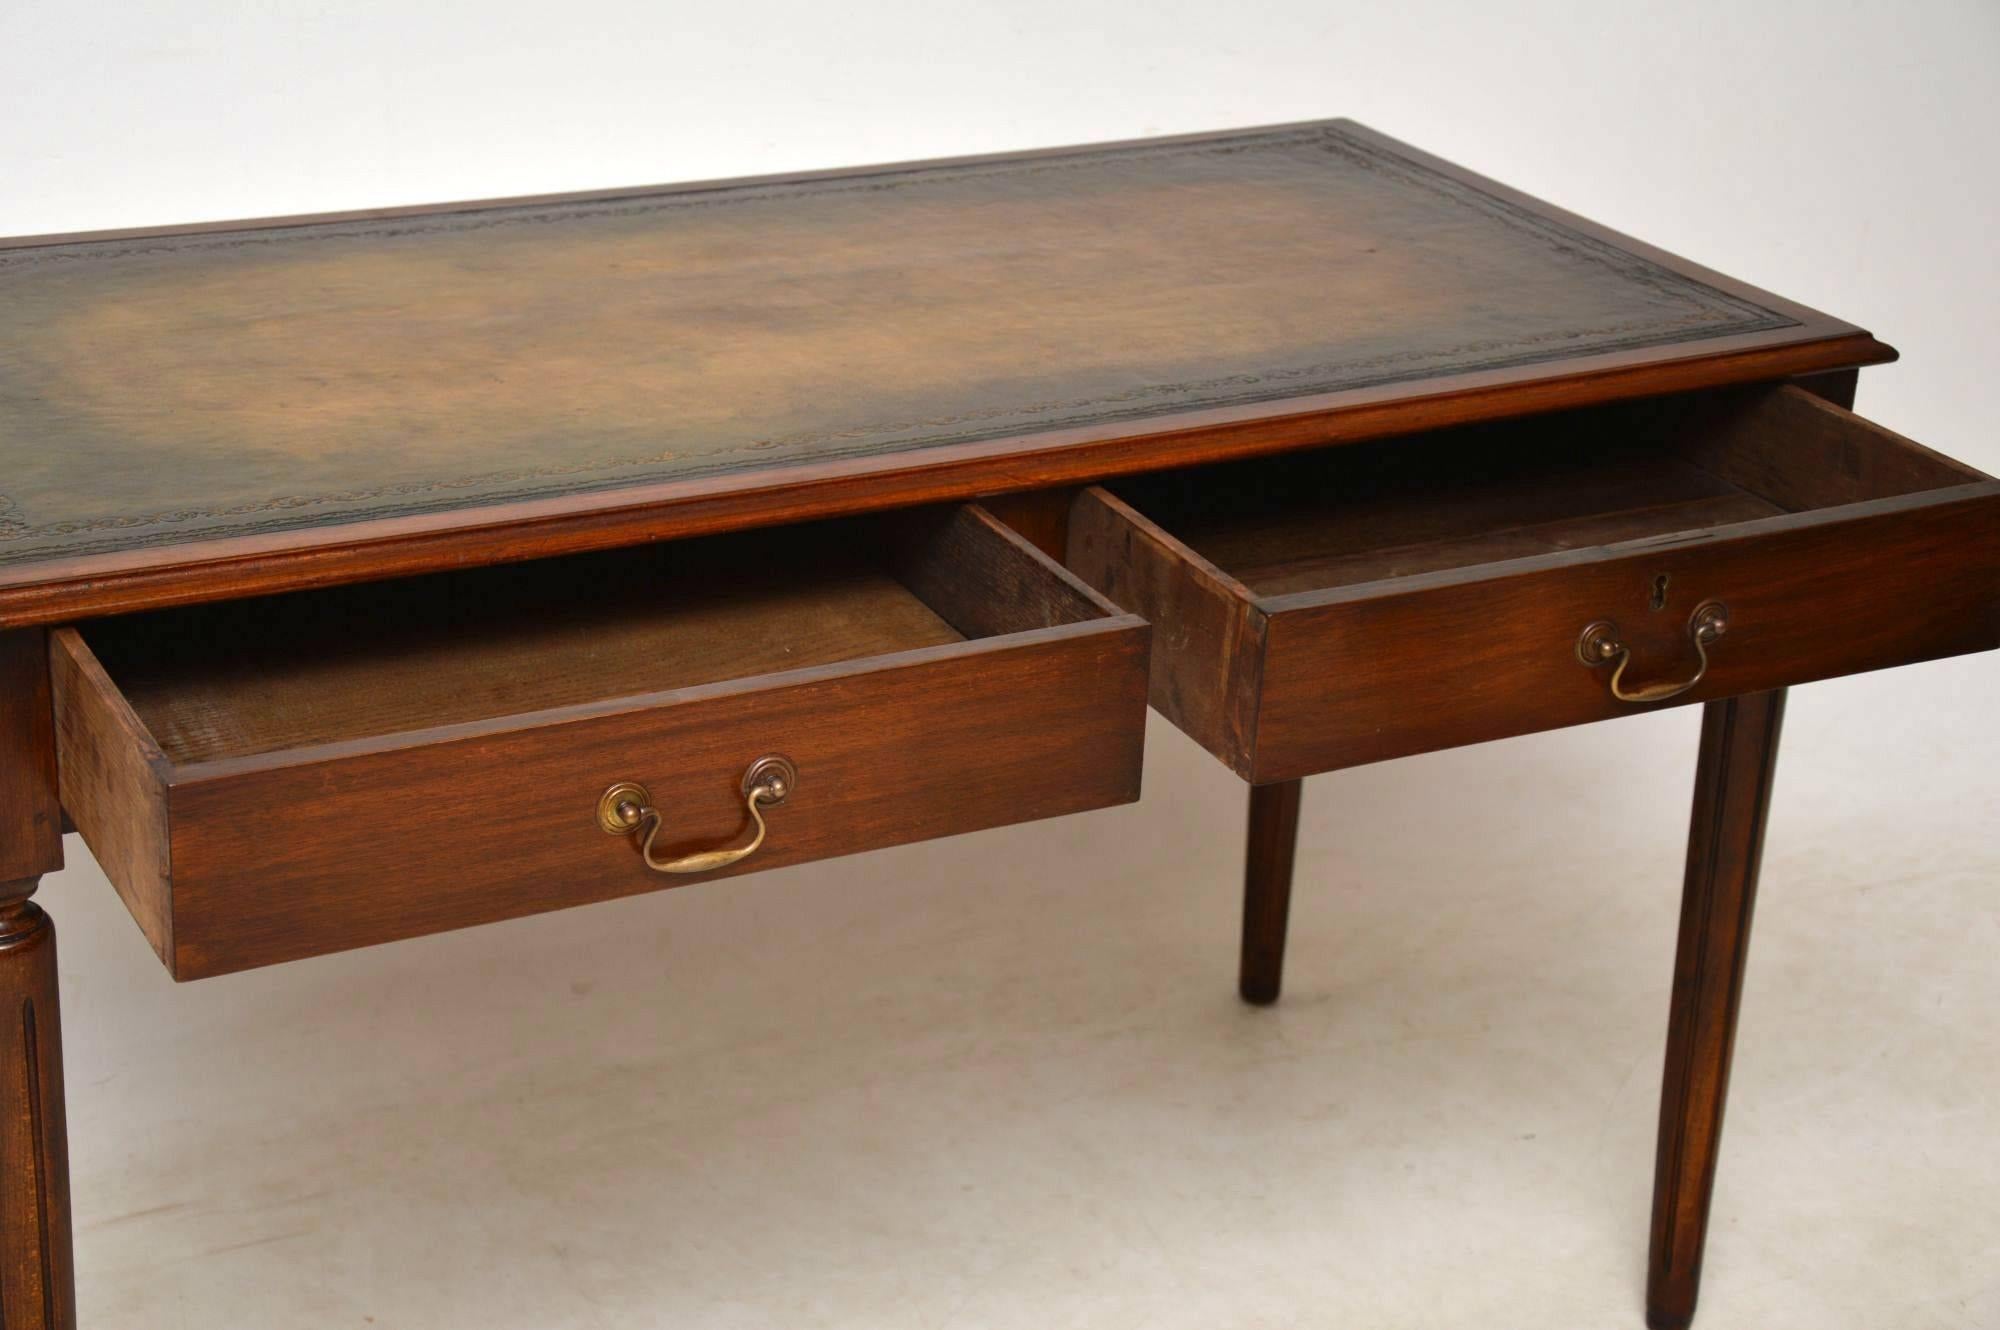 English Antique Mahogany Leather Top Writing Table